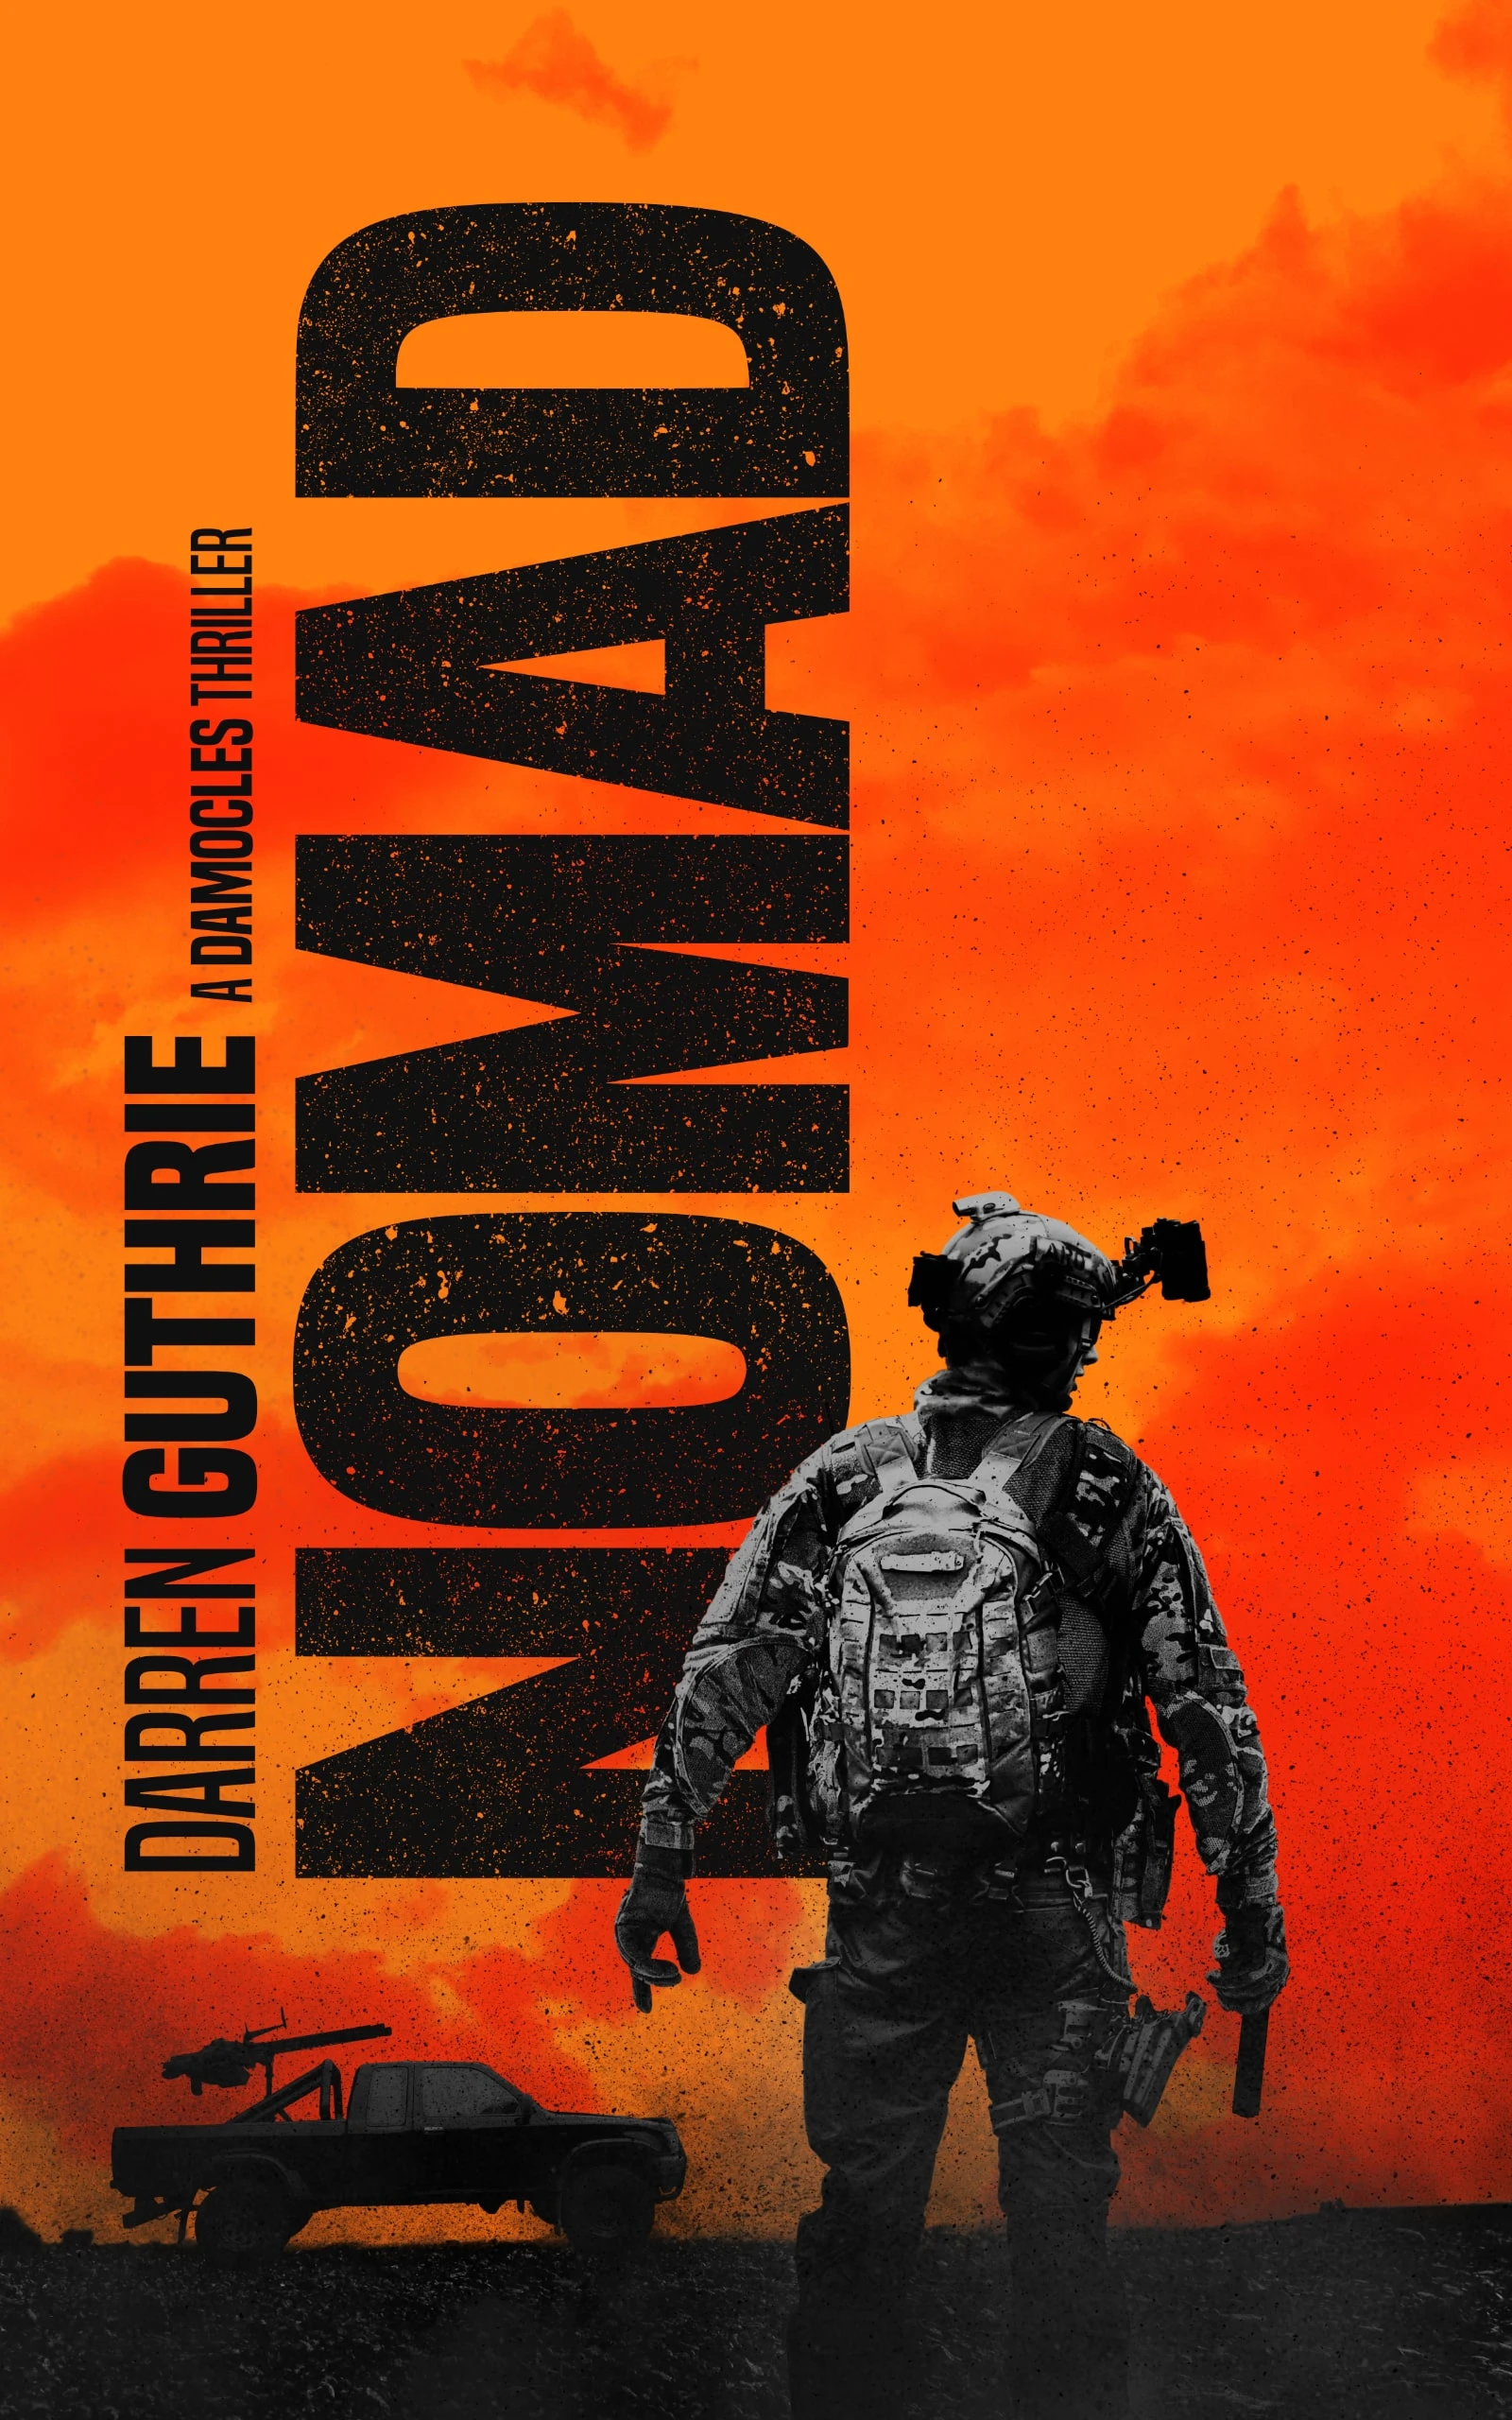 Nomad: A Damocles Thriller